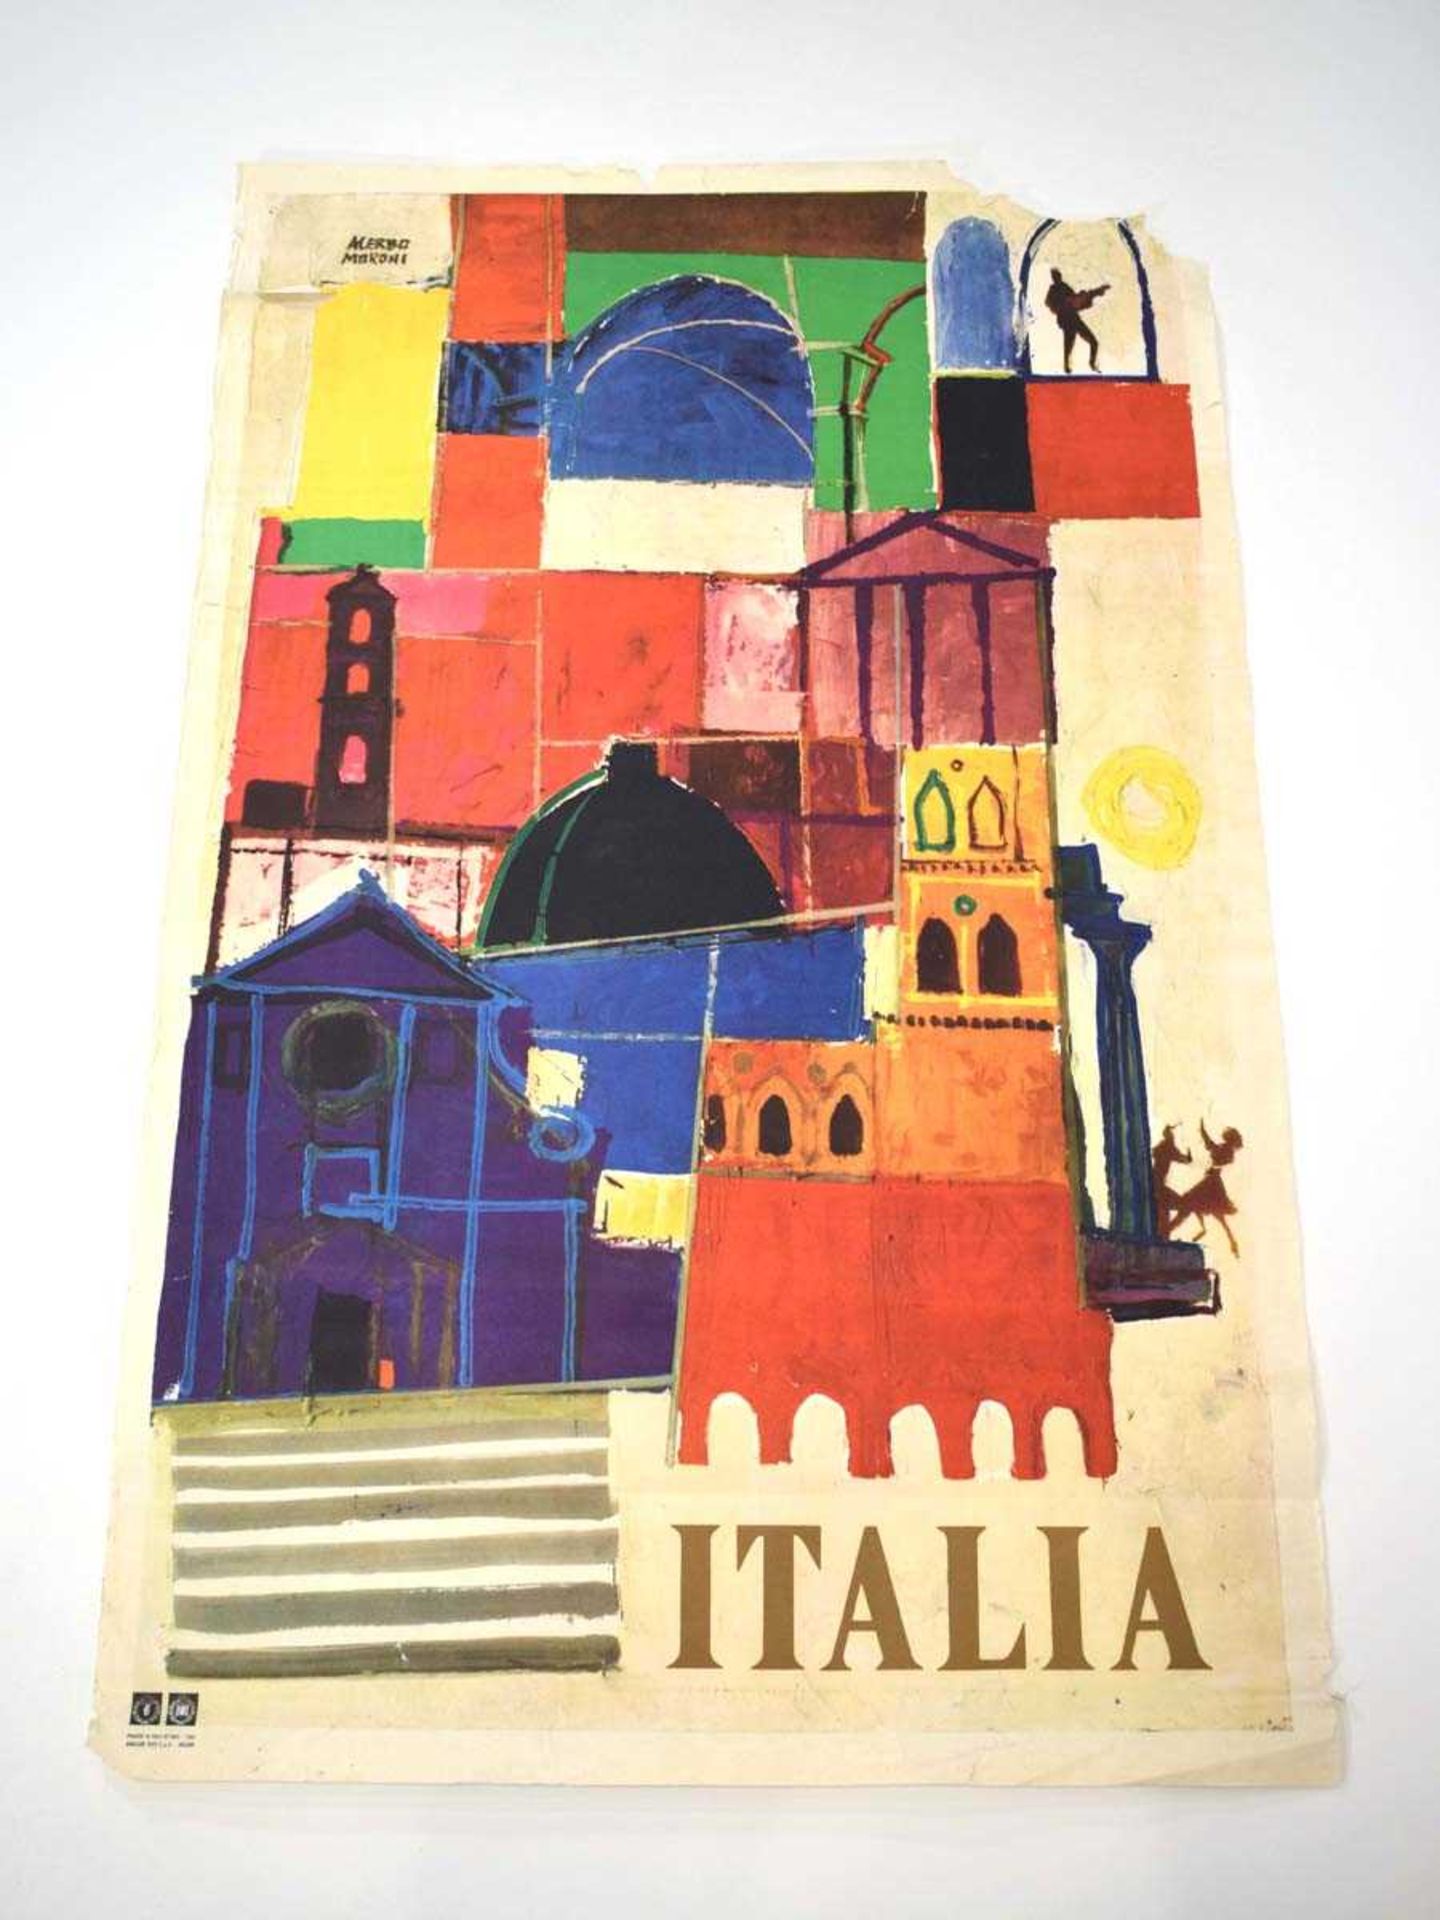 After Alerbo Moroni, 'Italia' travel poster, published by the Italian Tourist Board Enit, Milano